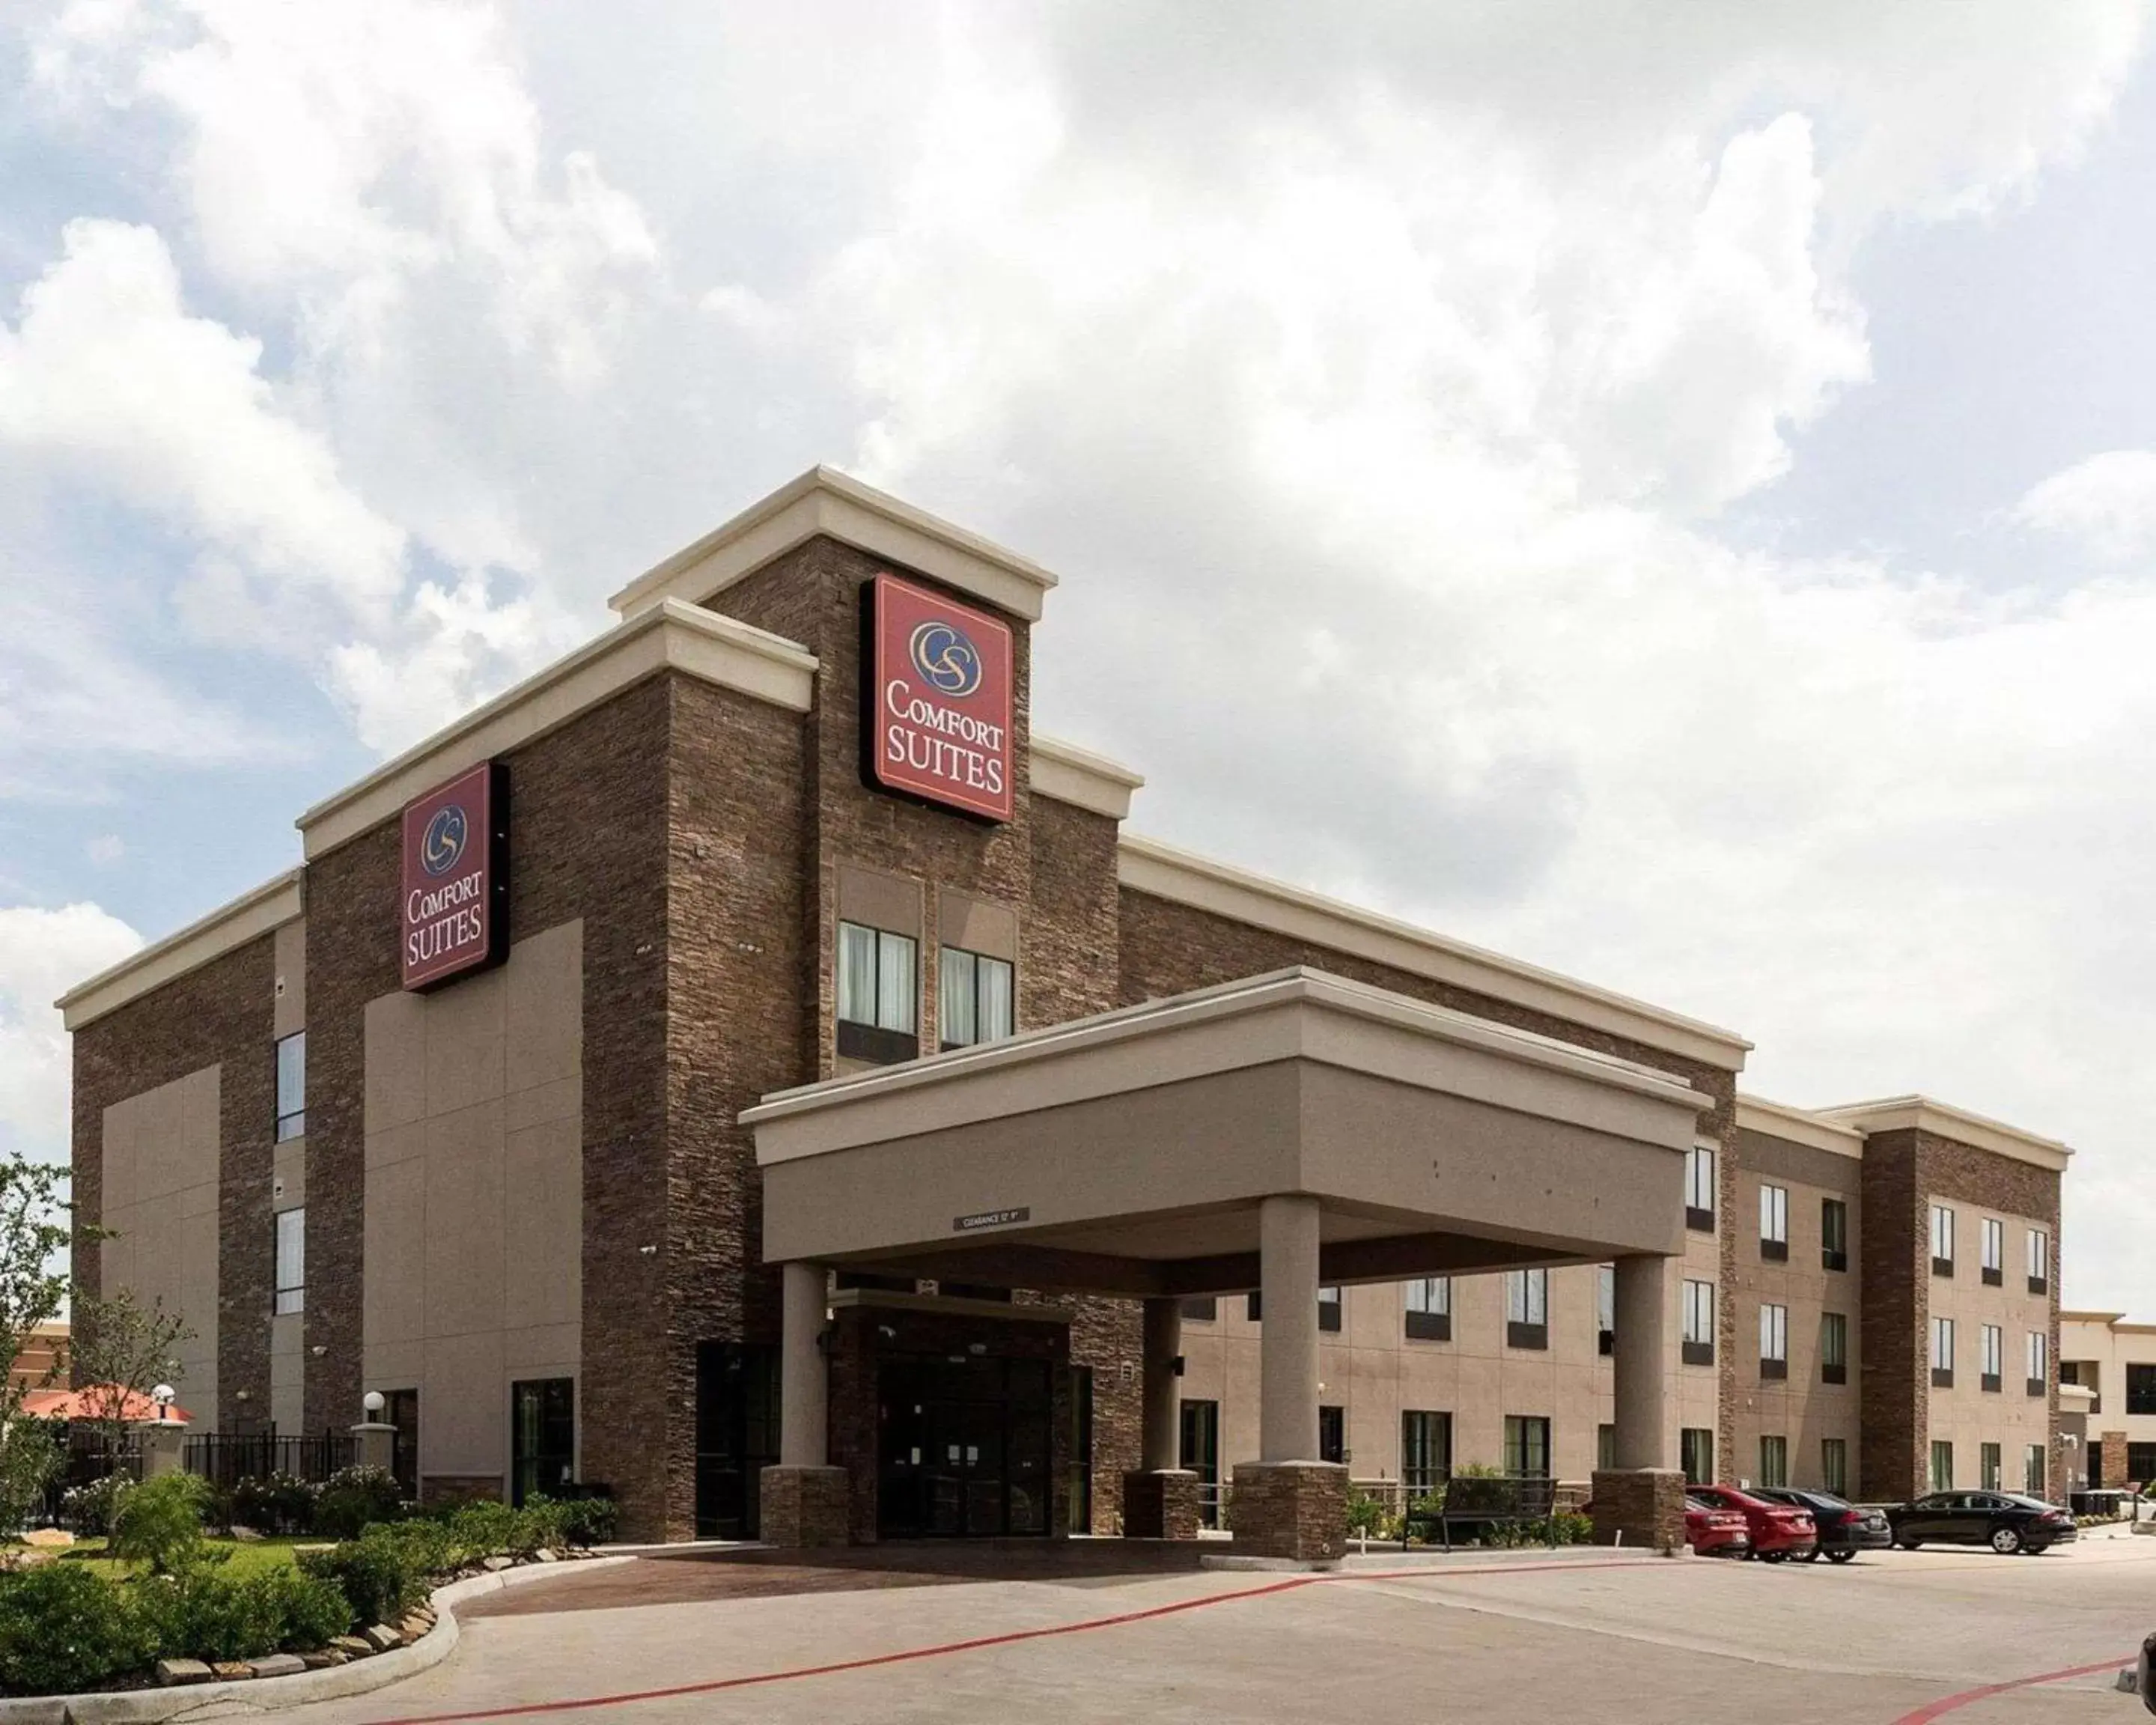 Property Building in Comfort Suites near Westchase on Beltway 8